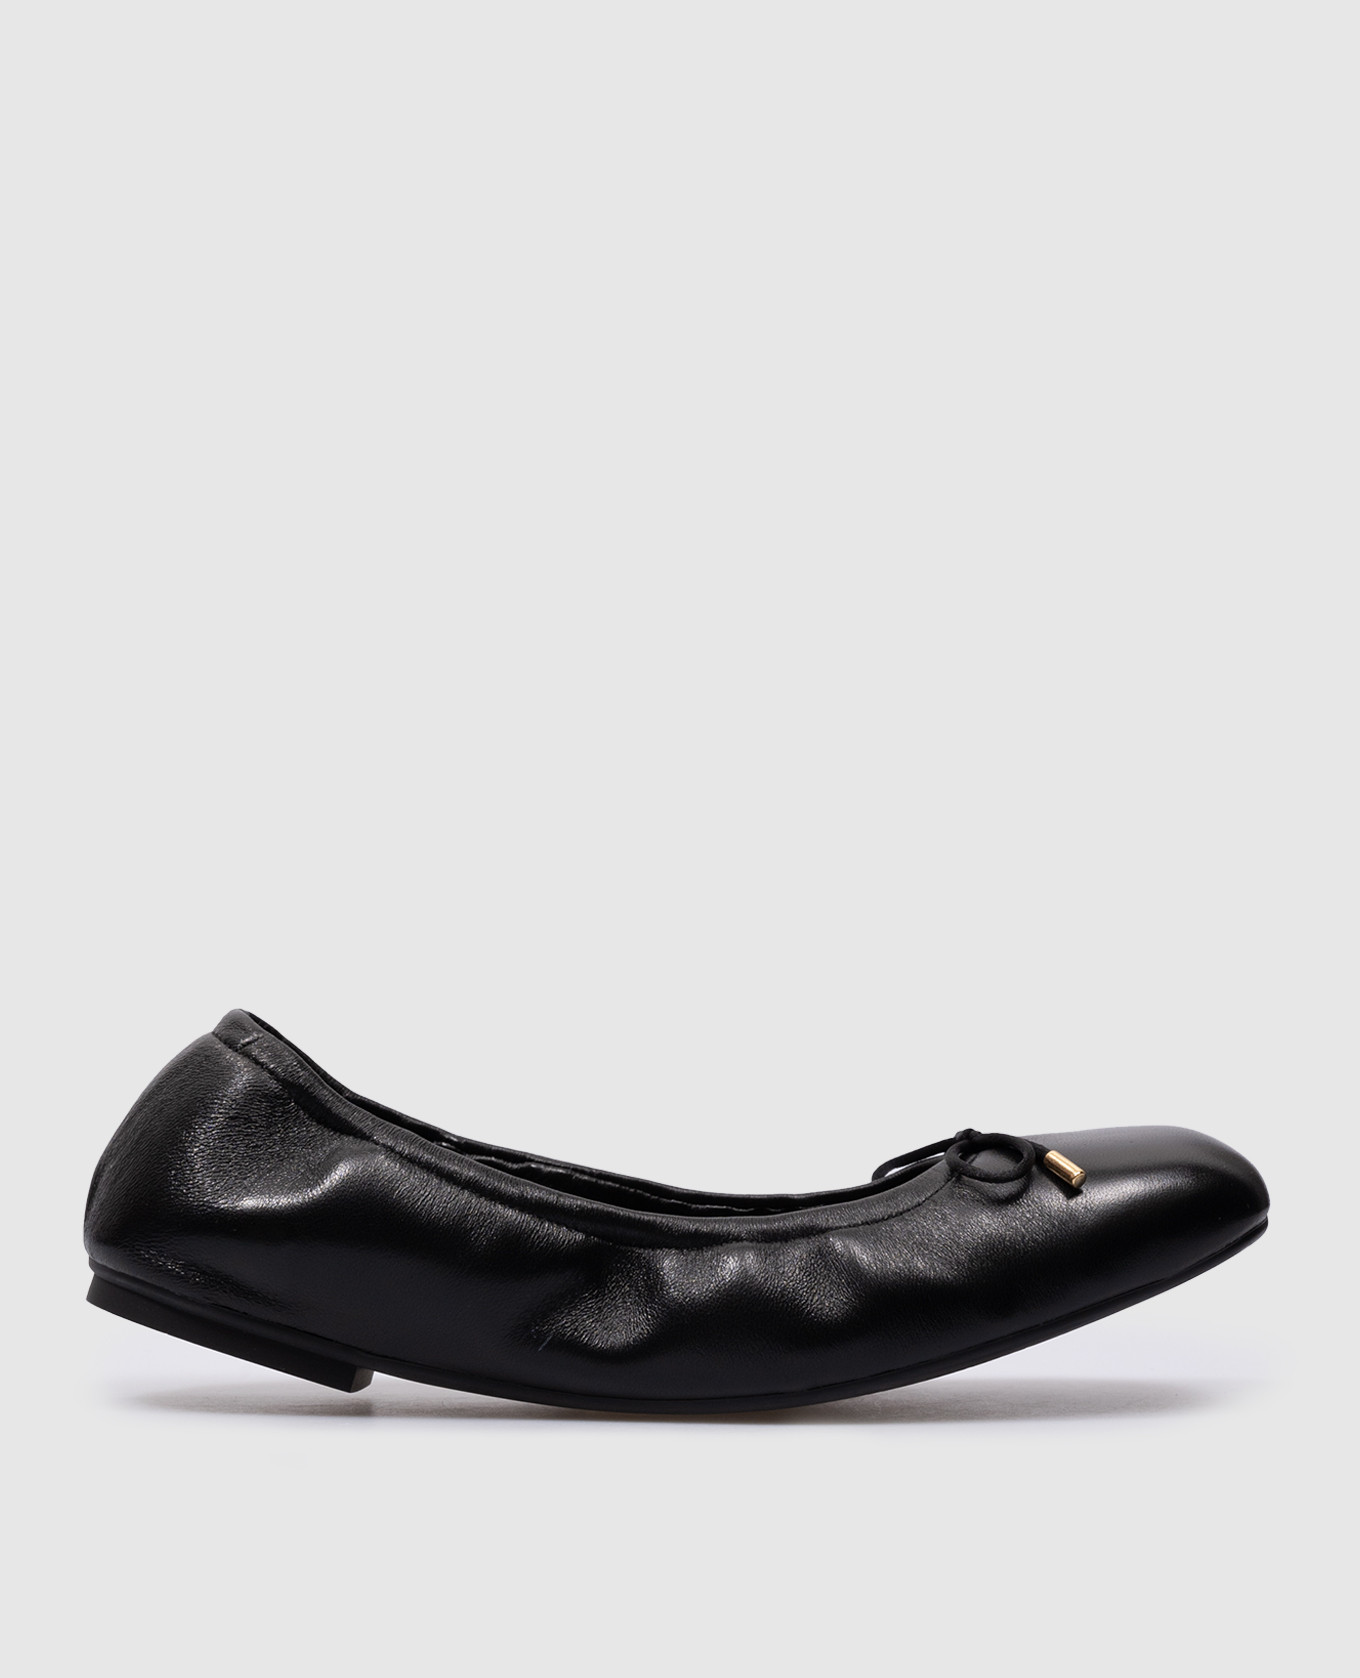 Black leather Bardot ballet flats with a bow